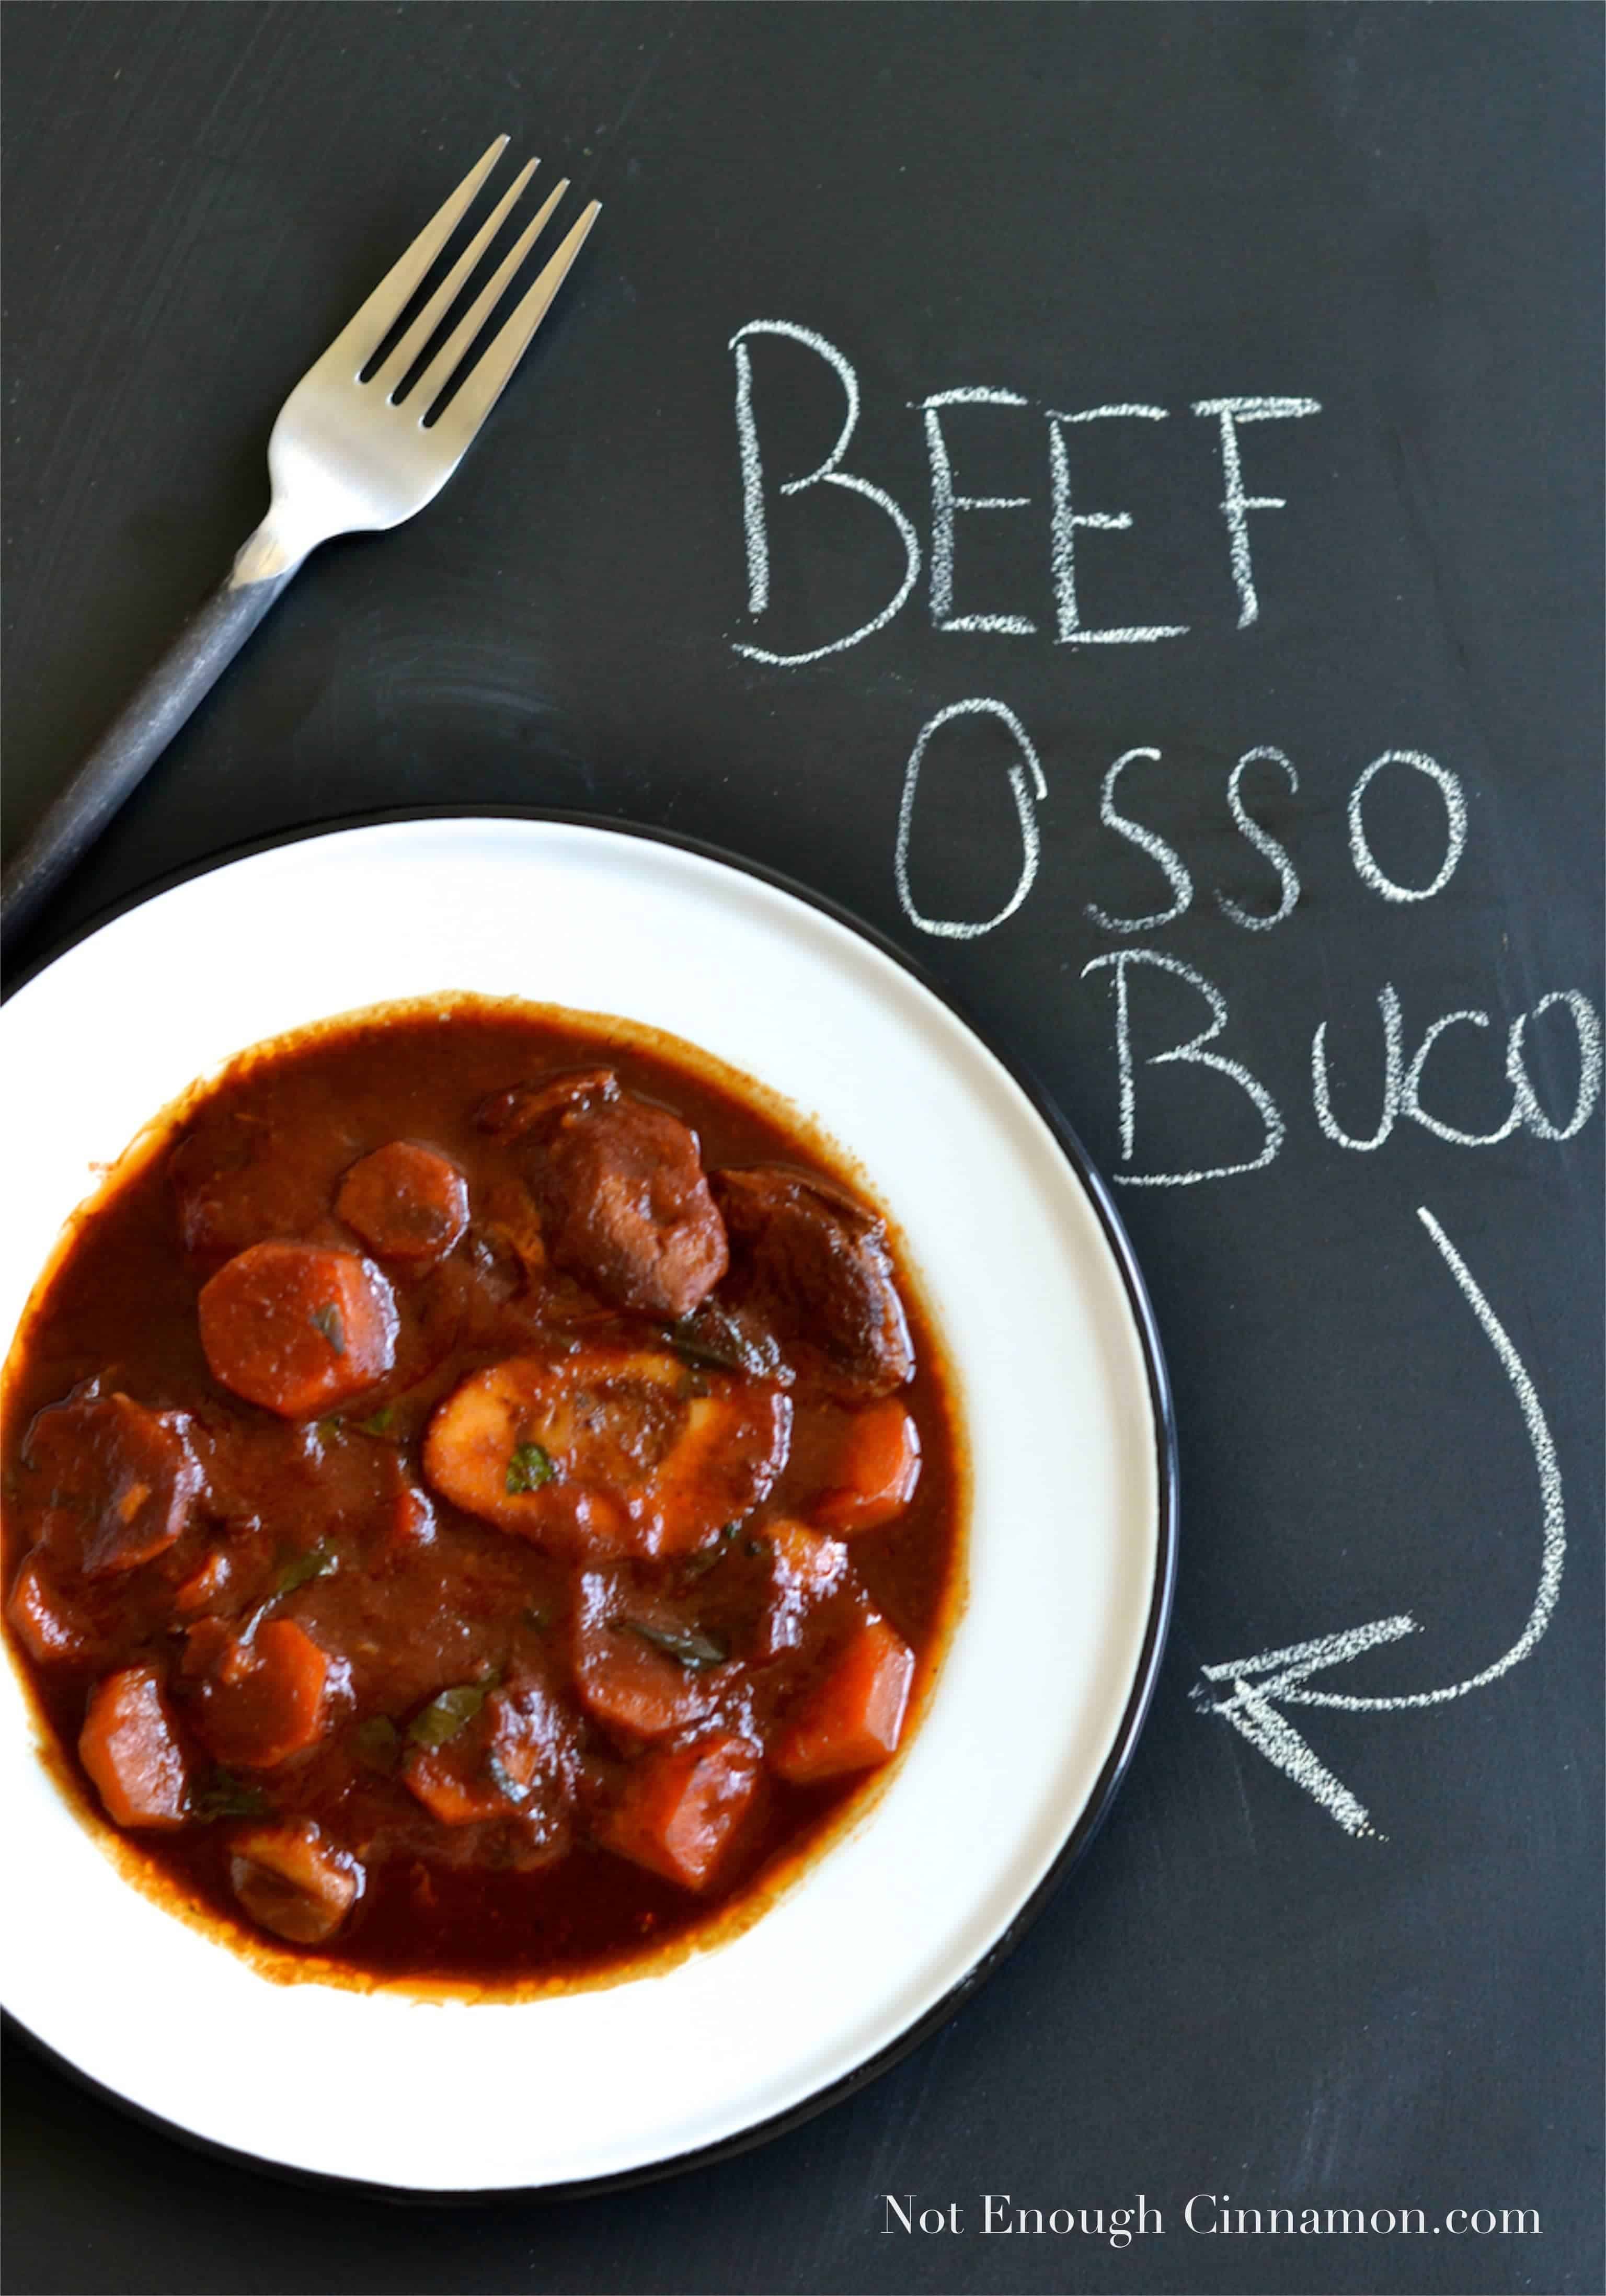 Slow-Cooker Beef Osso Buco - Not Enough Cinnamon3072 x 4391